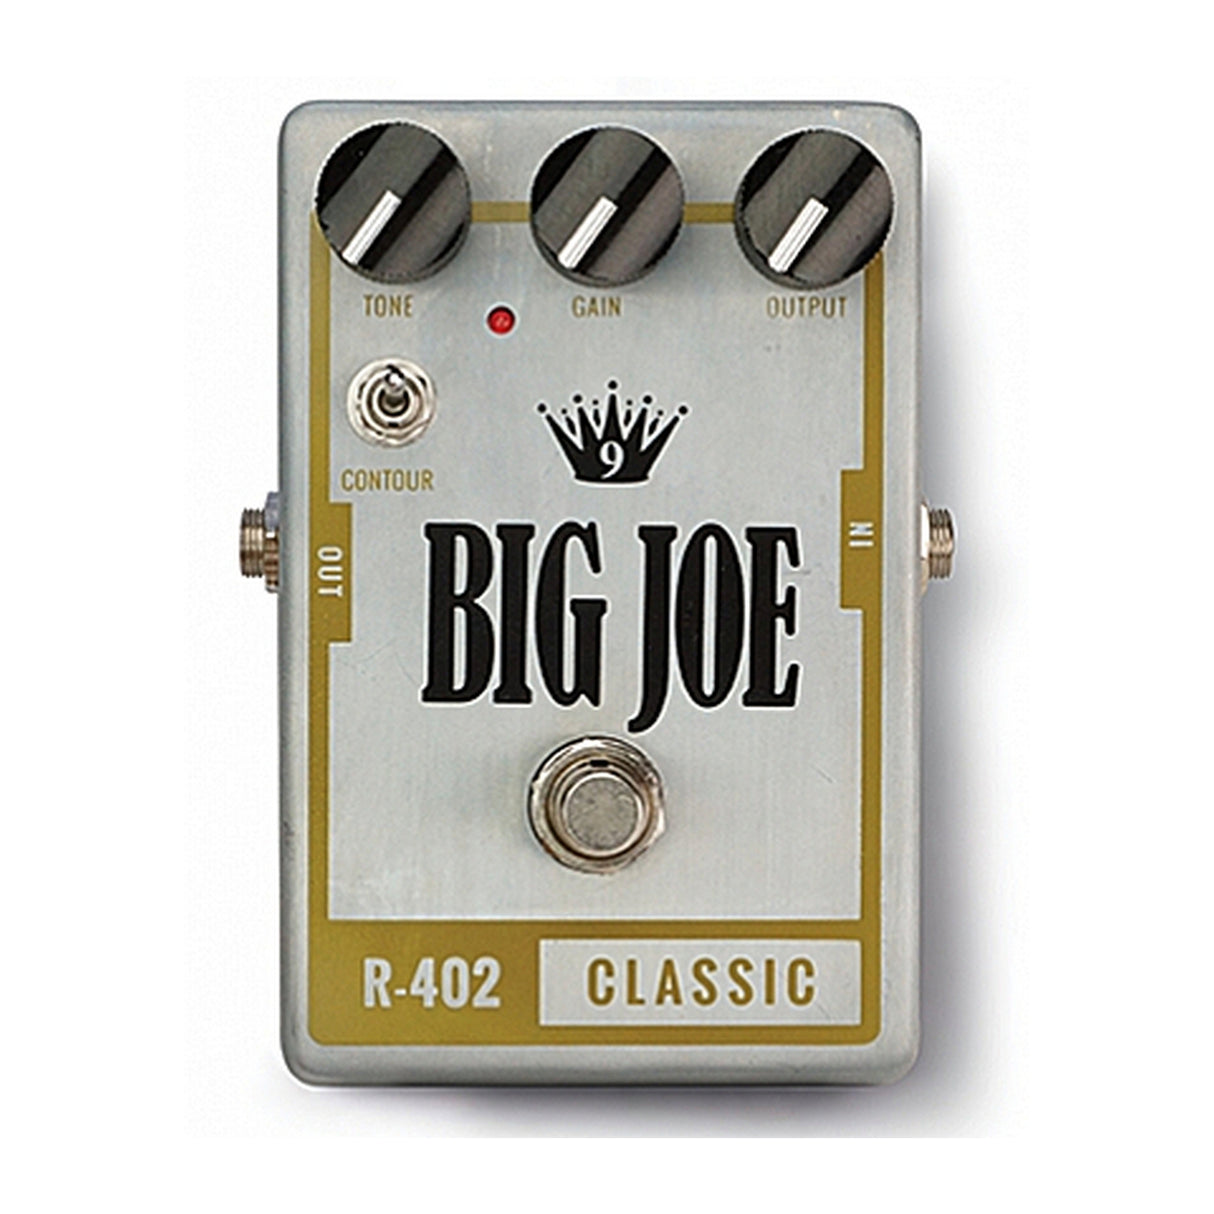 Big Joe Stomp Box Company R-402 | Classic Overdriven Bypass Function Tube Amp Sound Guitar Pedal